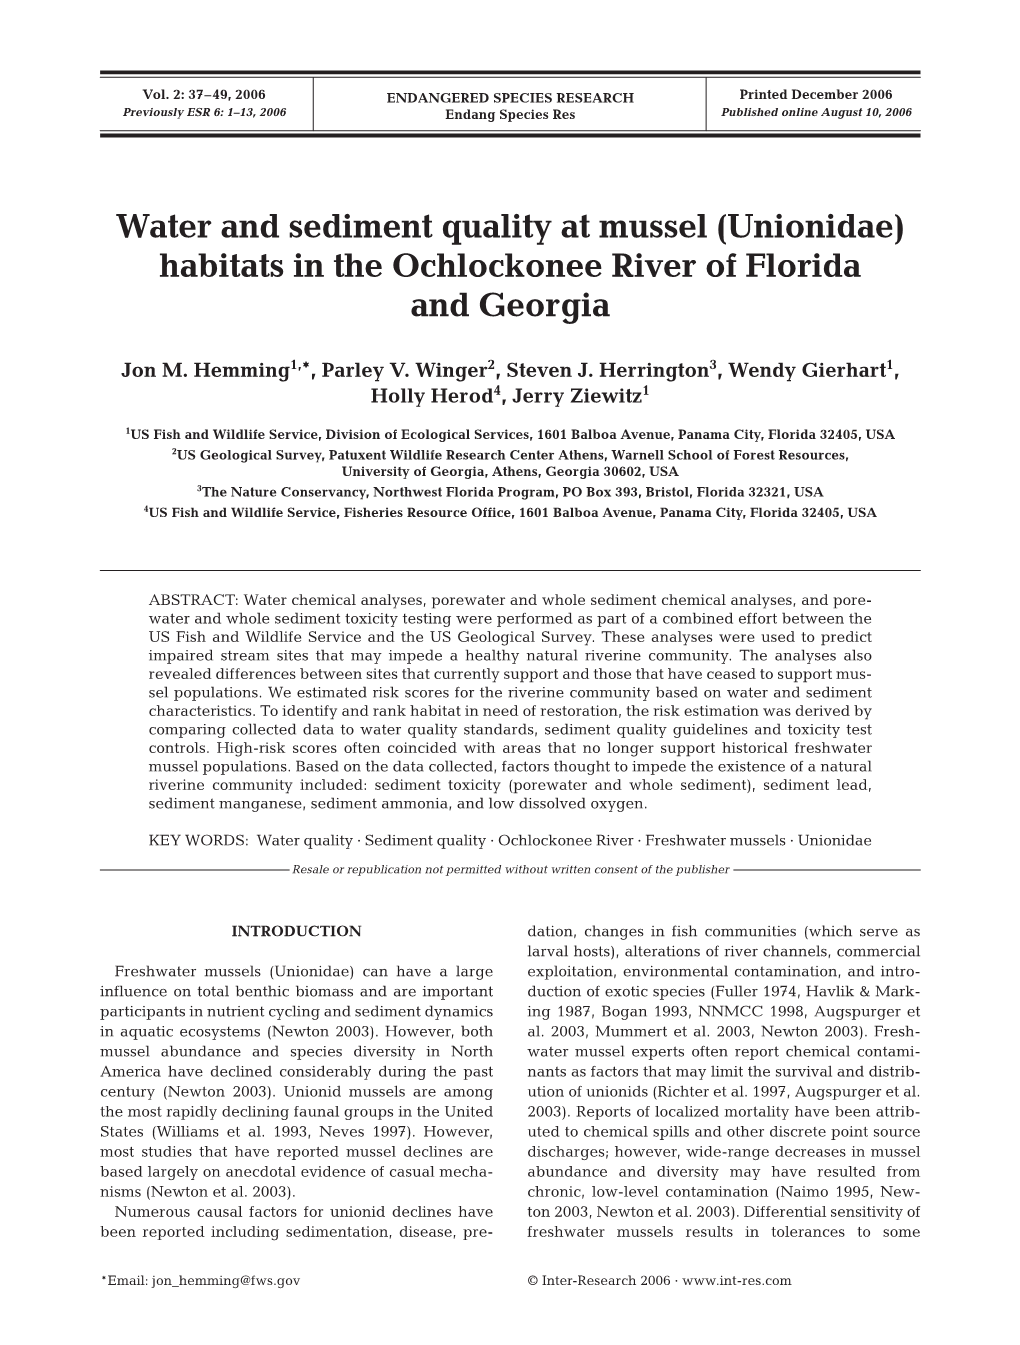 Water and Sediment Quality at Mussel (Unionidae) Habitats in the Ochlockonee River of Florida and Georgia